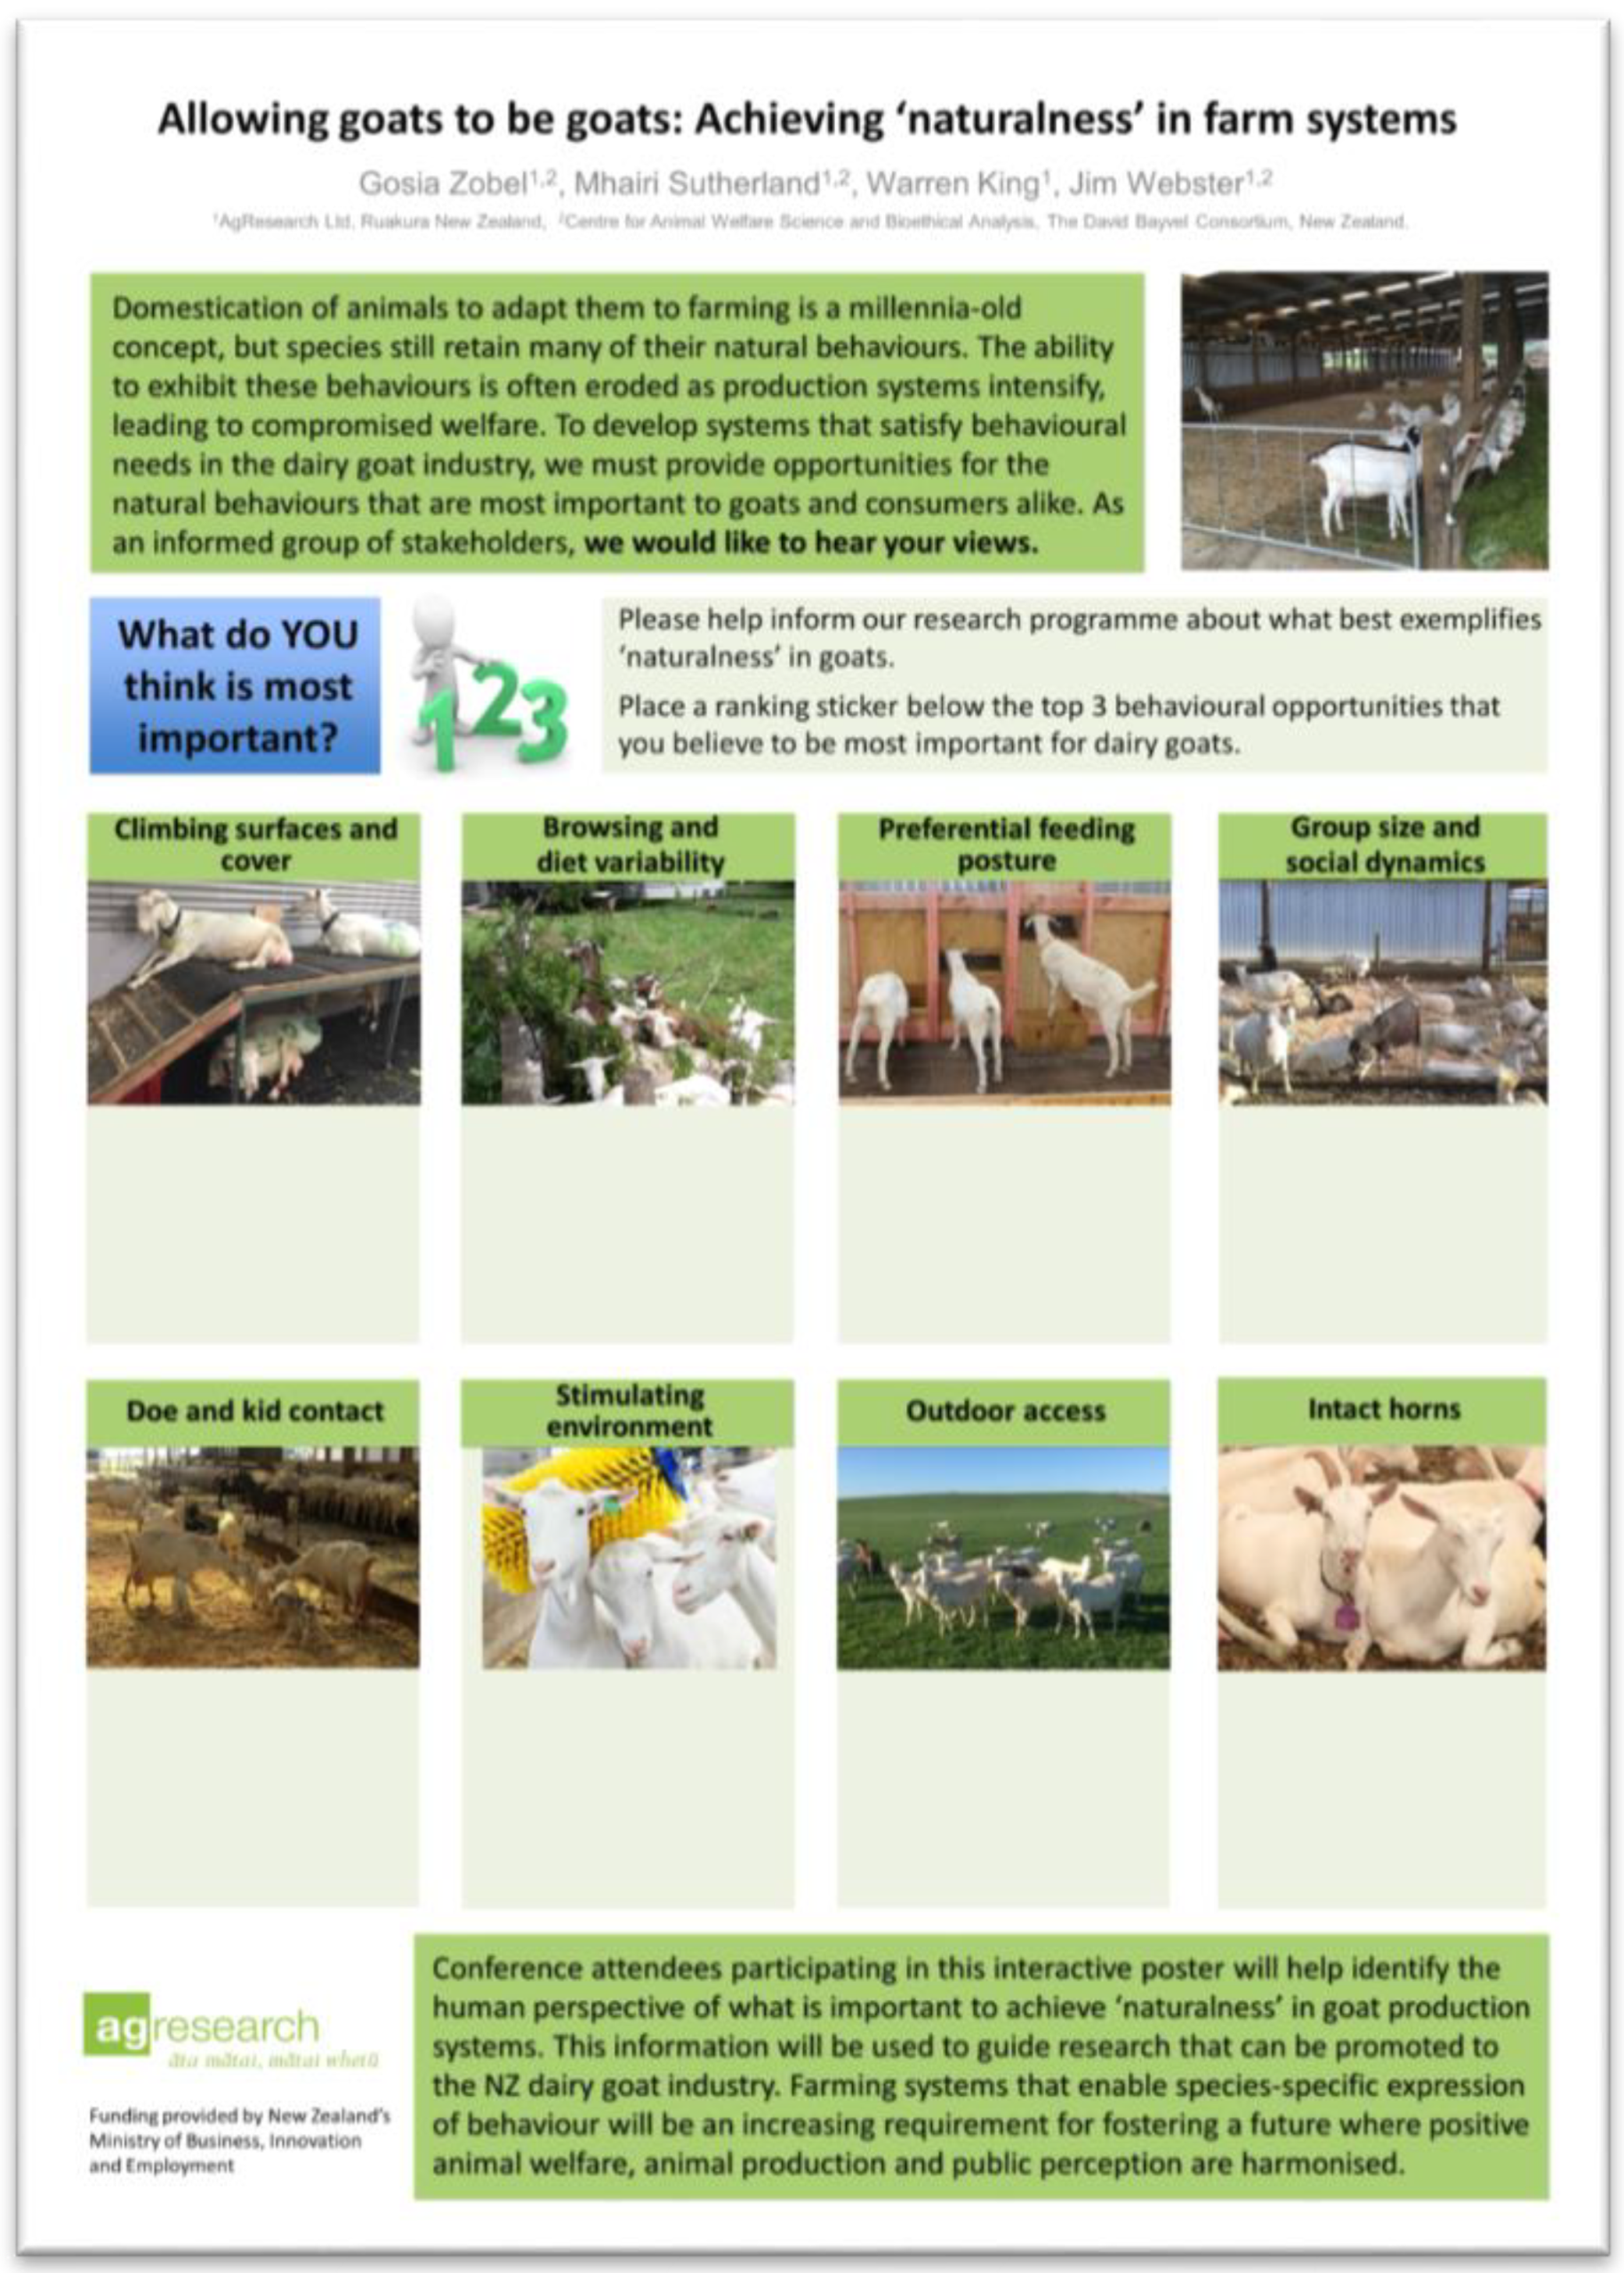 Animals | Free Full-Text | Interactive Data-Gathering Posters as a Research  Tool: A Case Study Assessing Public Opinion on Incorporation of Natural  Behavior into Management Systems